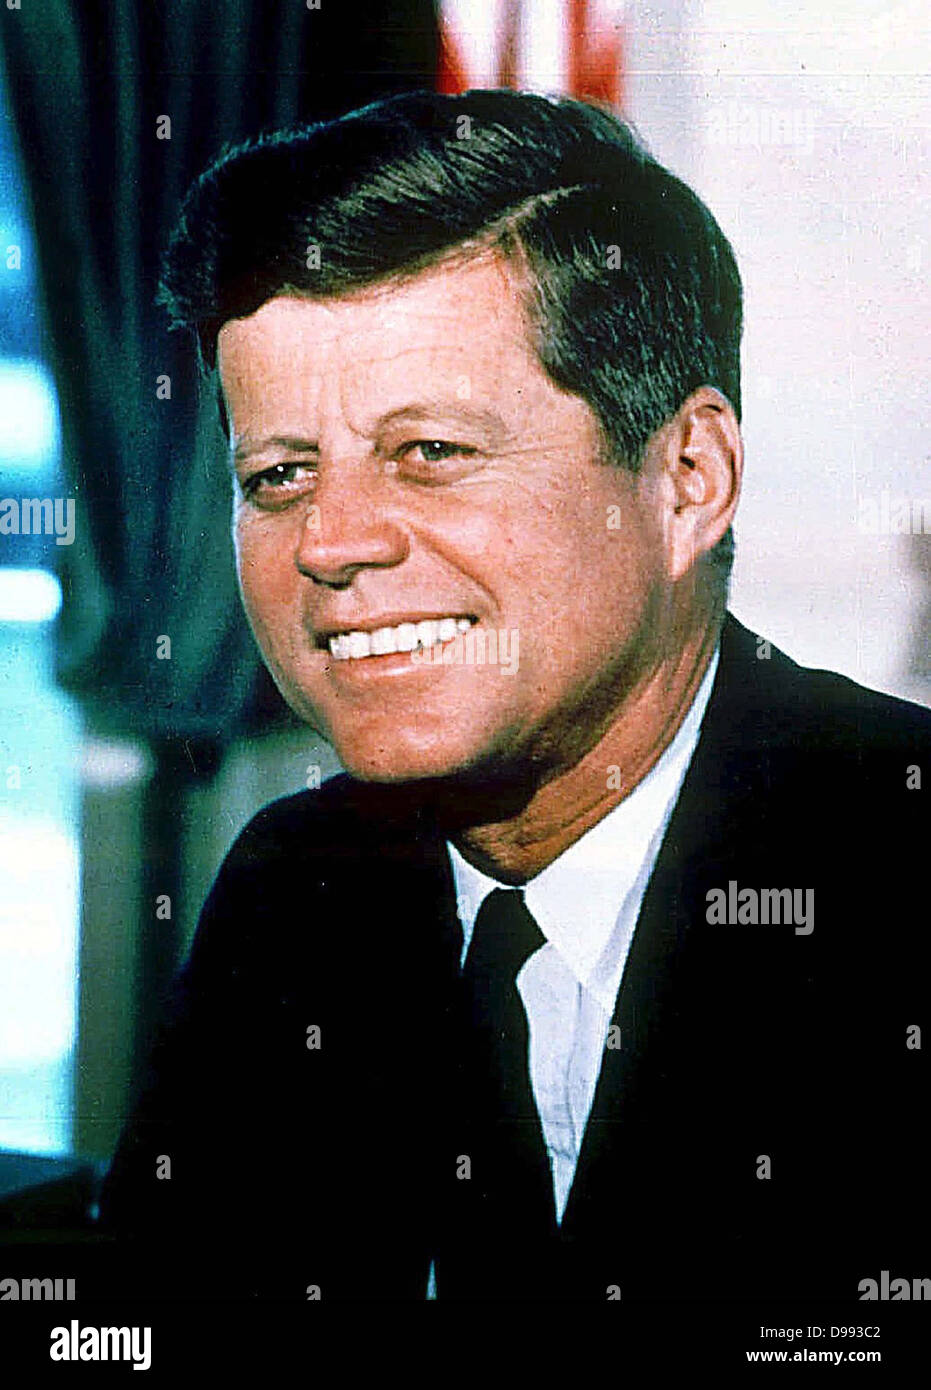 John Fitzgerald Kennedy (May 29, 1917 – November 22, 1963), 35th President of the United States, serving from 1961 until his assassination in 1963. Stock Photo